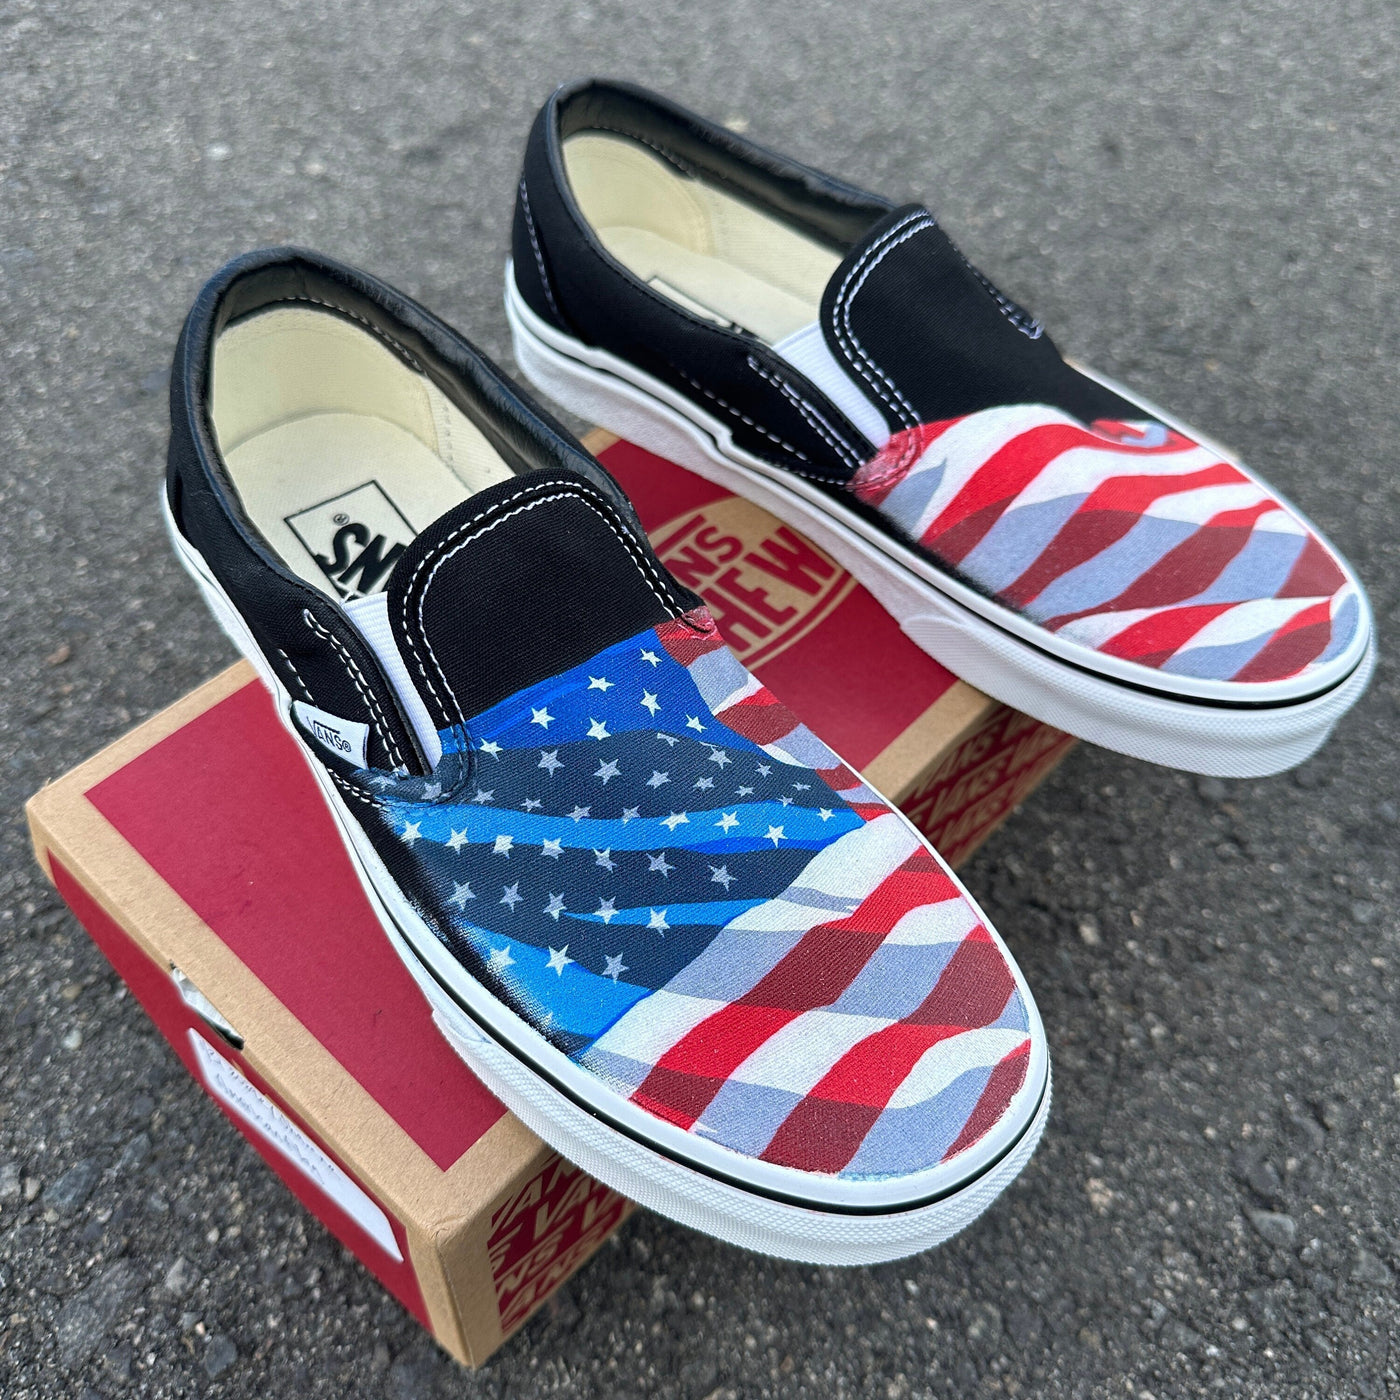 Black Slip On Vans Shoes for Men and Women Featuring American Flag